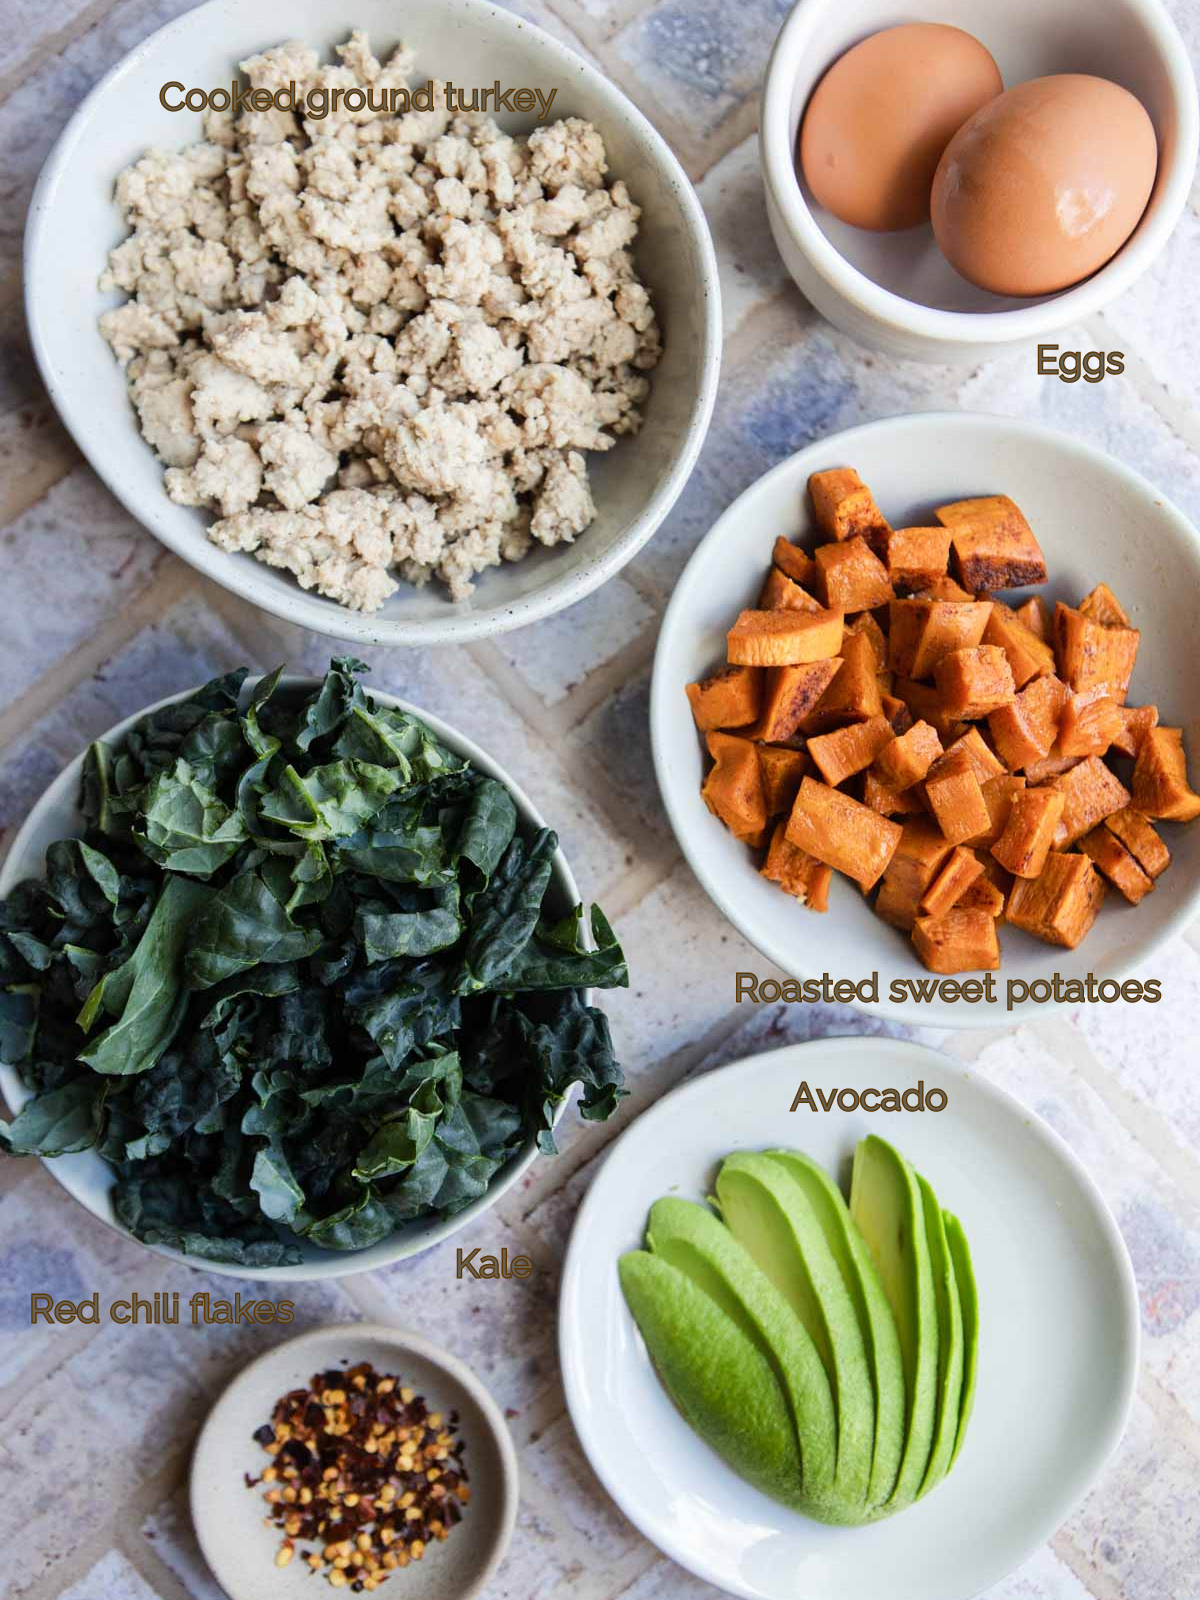 cooked ground turkey, raw kale, eggs, avocado and cooked sweet potatoes on white plates 